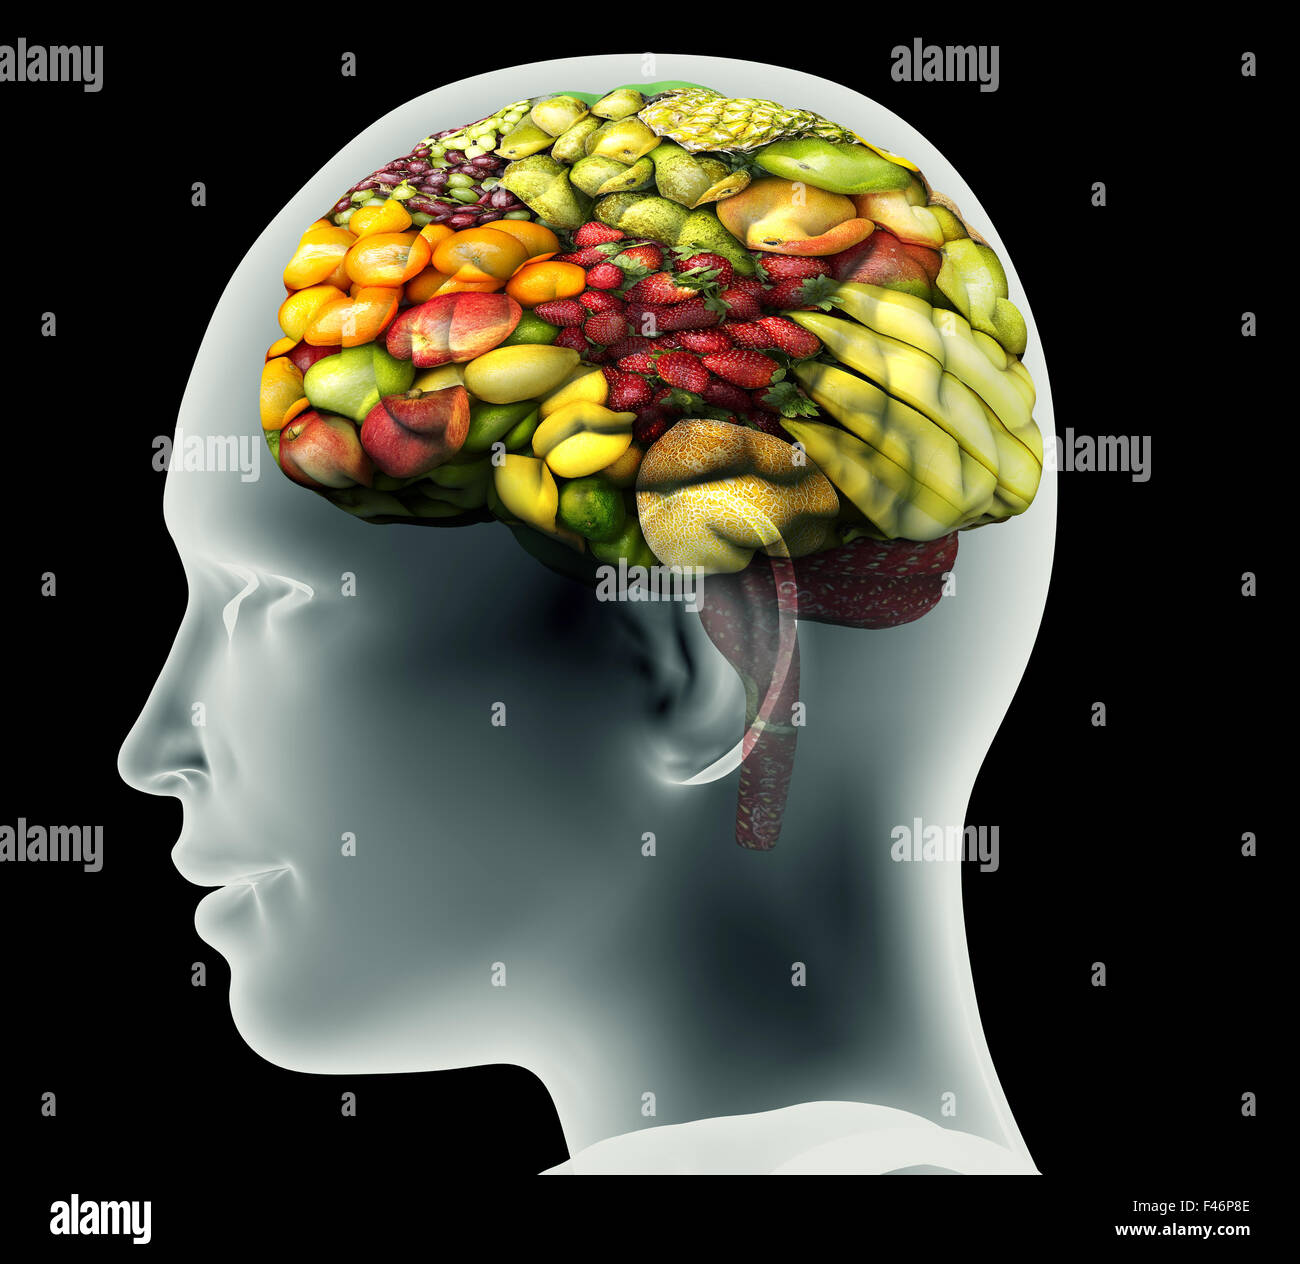 x-ray image of human head with fruit for a brain. Stock Photo